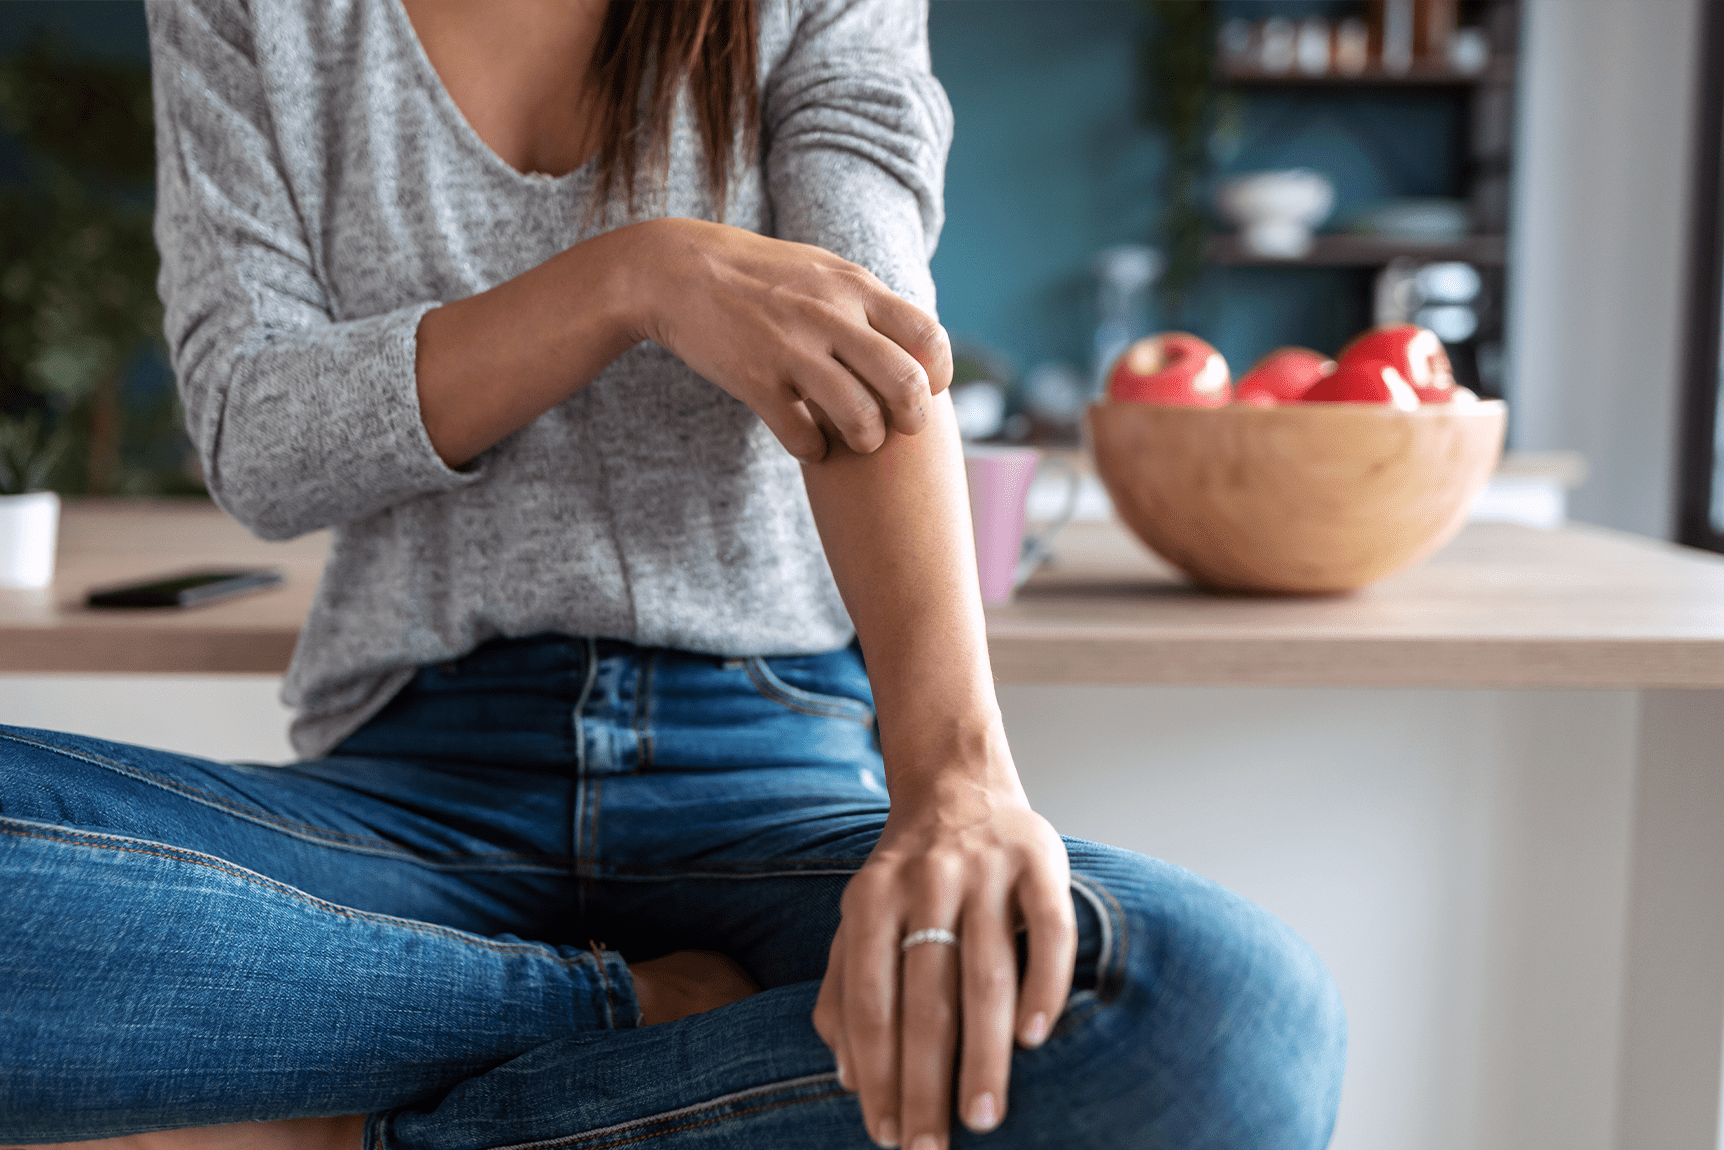 Itchy, Itchy: 5 Tips to Care for Eczema and Psoriasis - The Collagen Co.